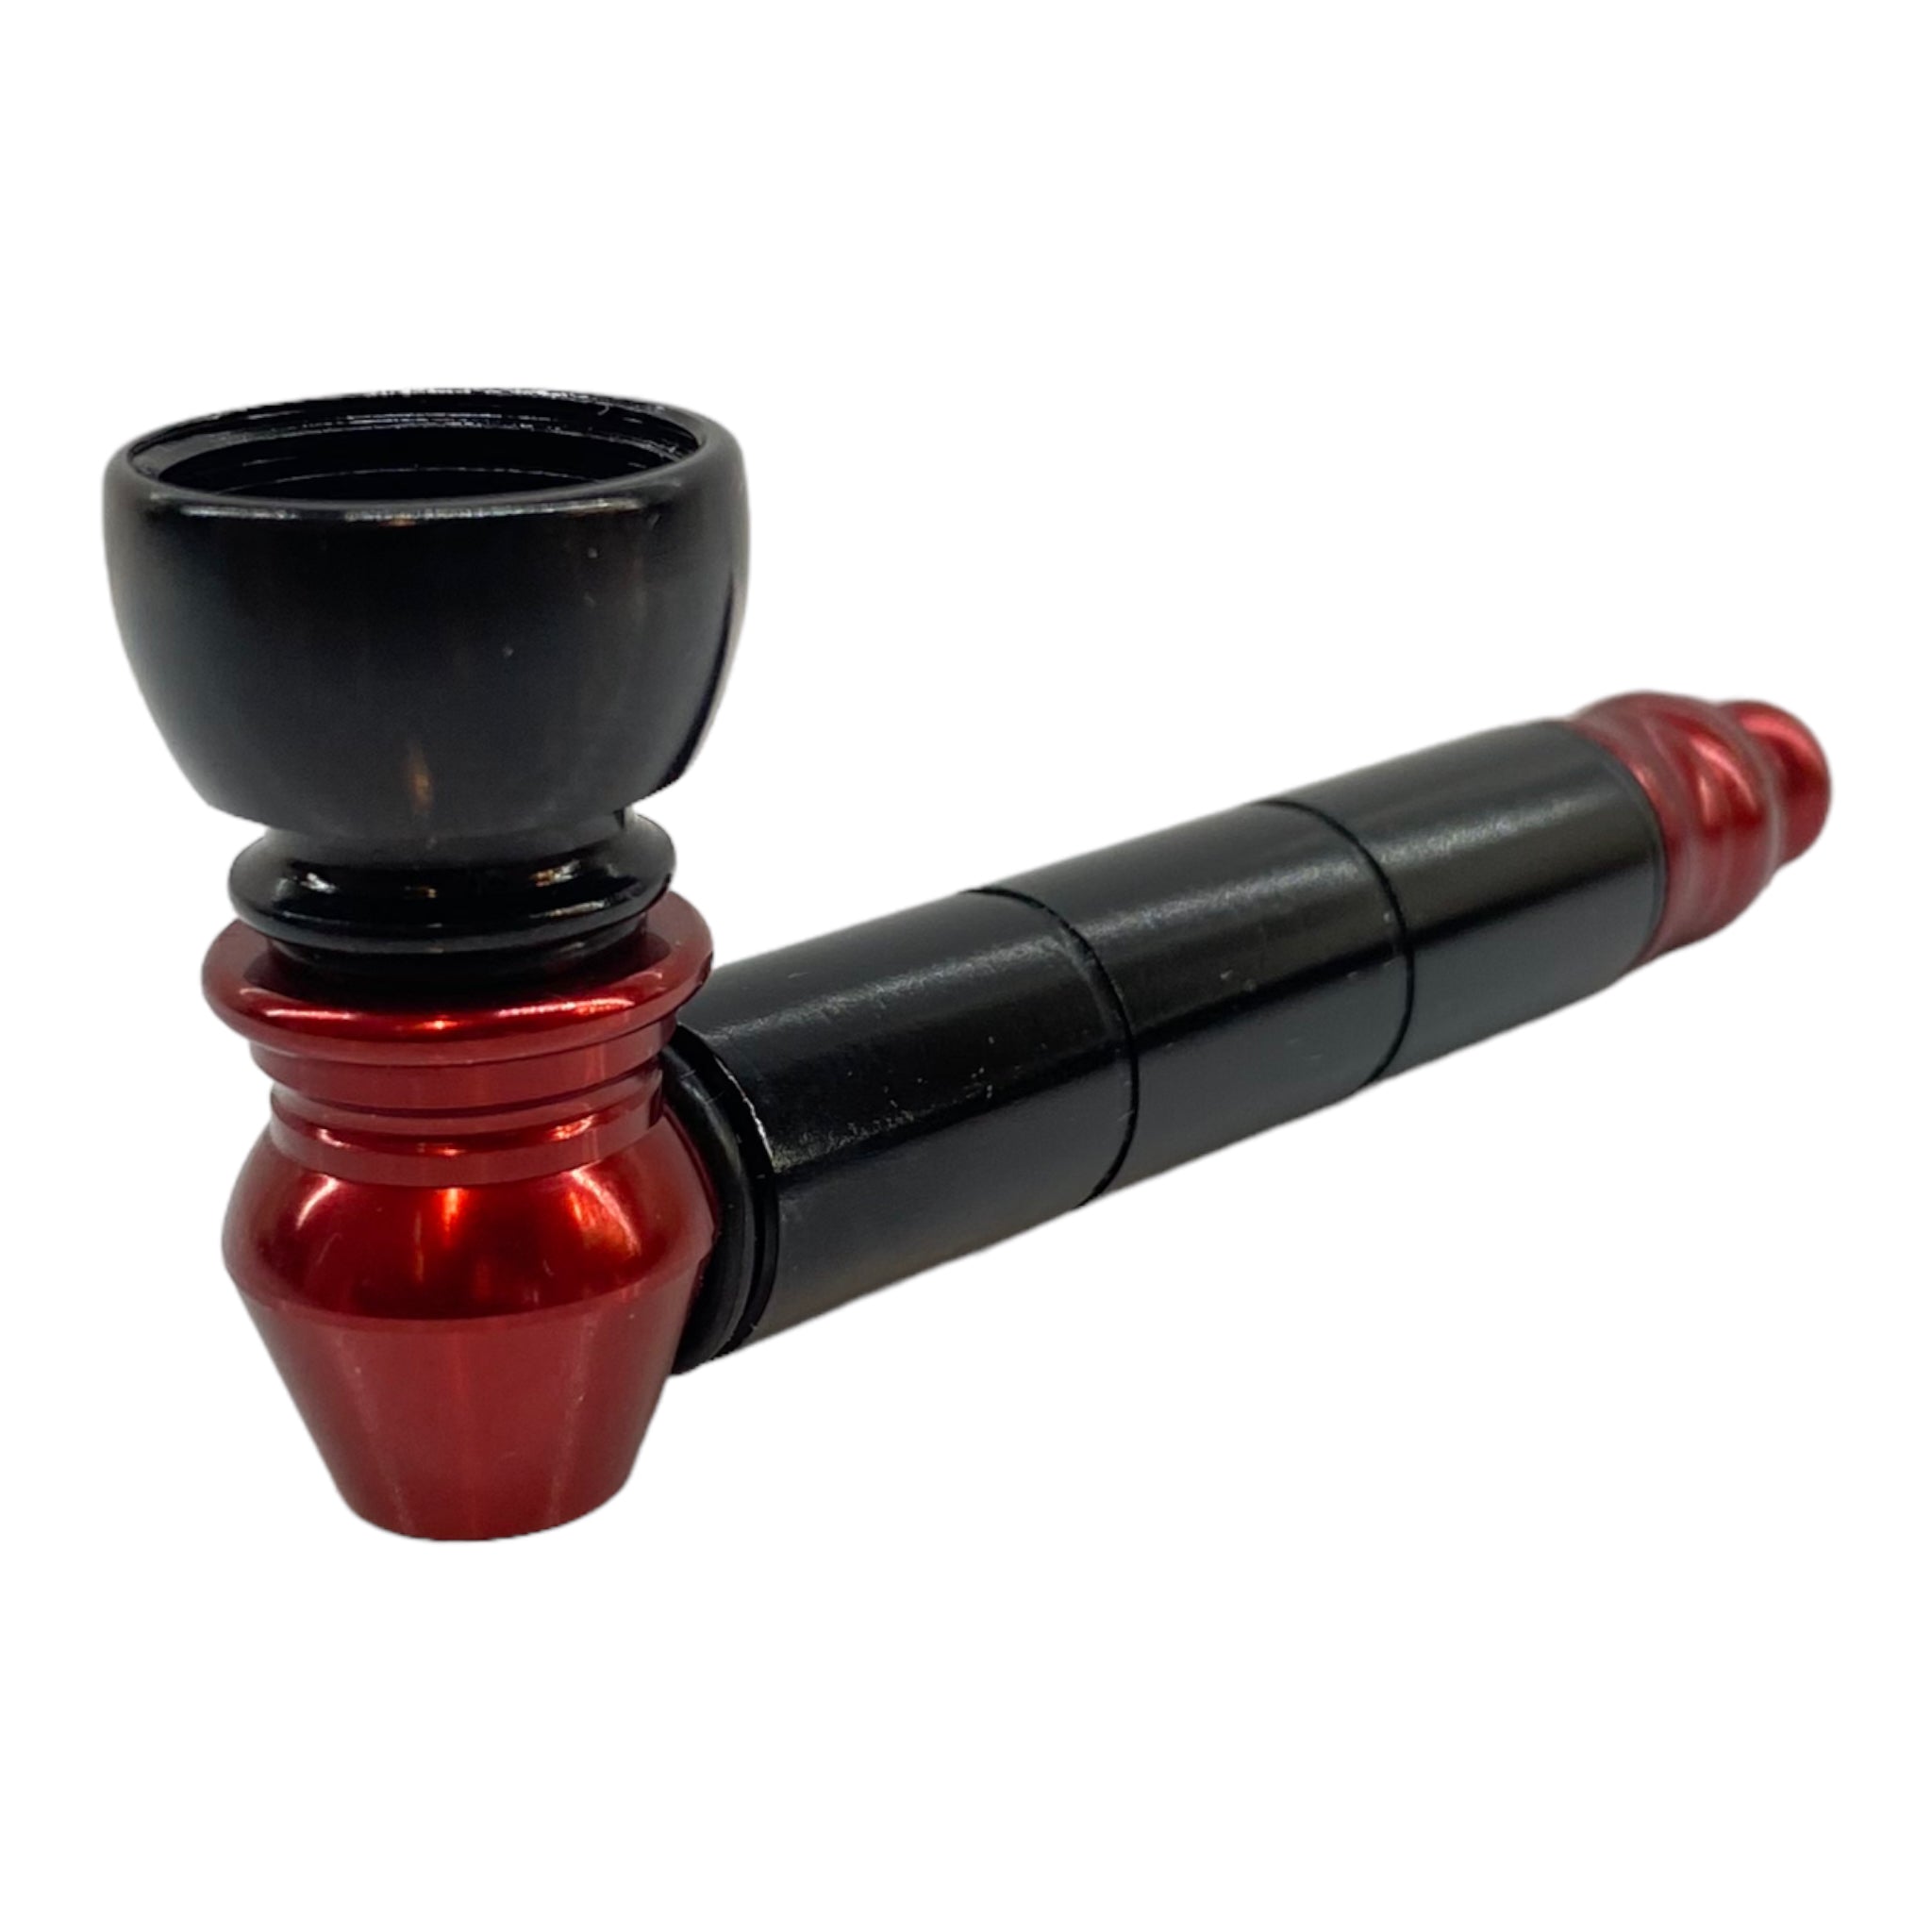 Metal weed and tobbaco pipe black and red basic metal pipe with small chamber for sale free shipping